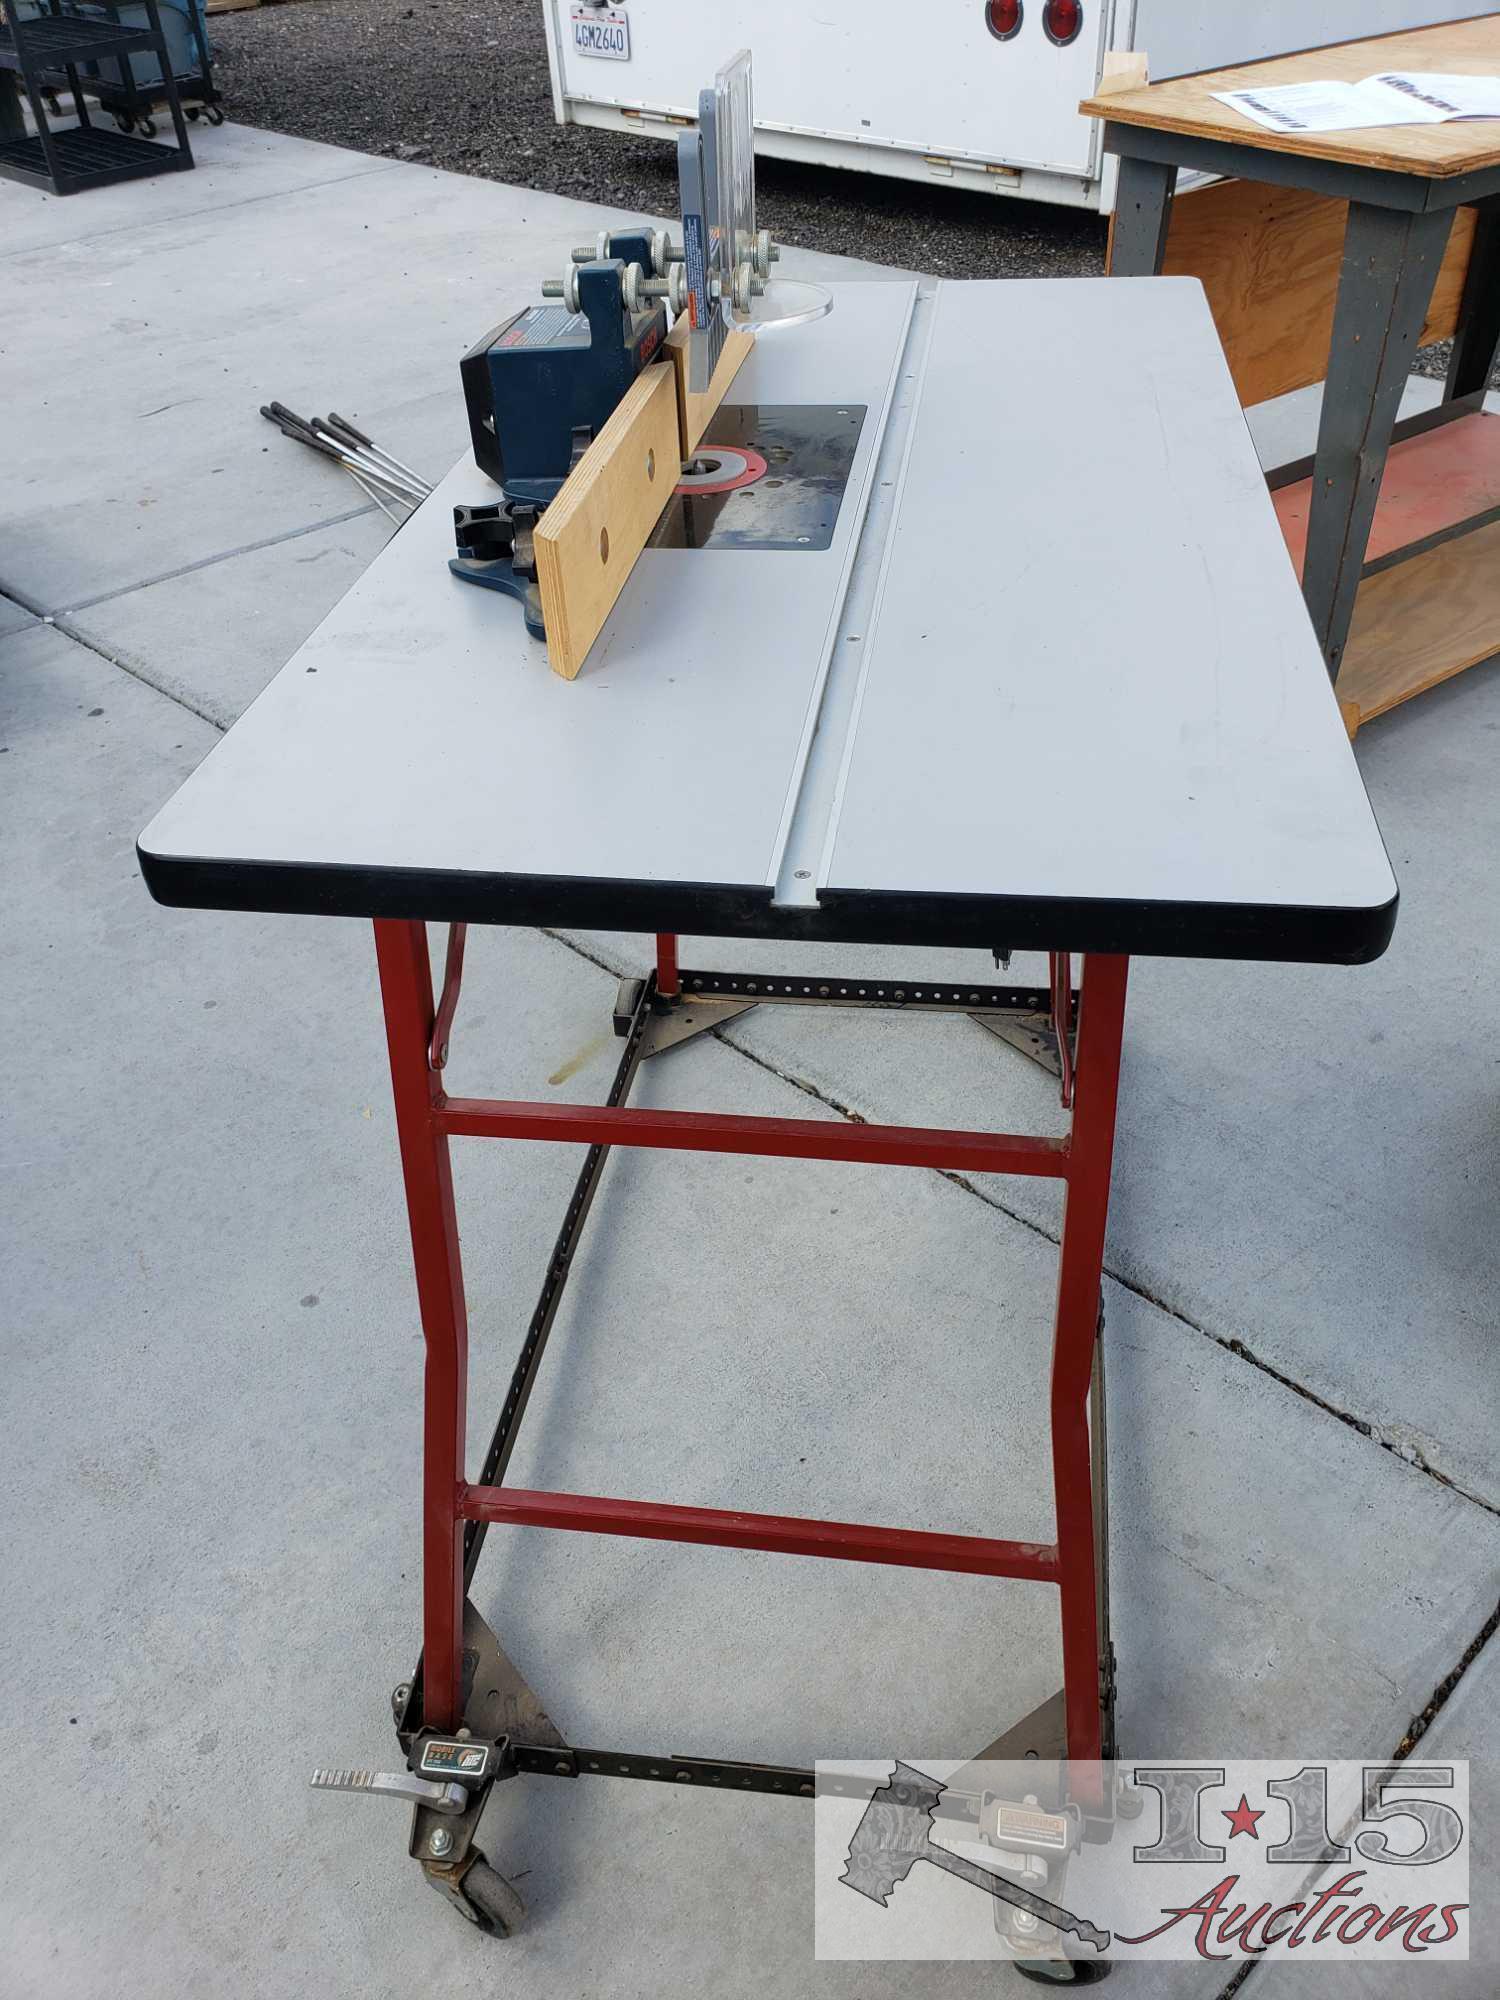 Bosch Router Table with Case and all Parts